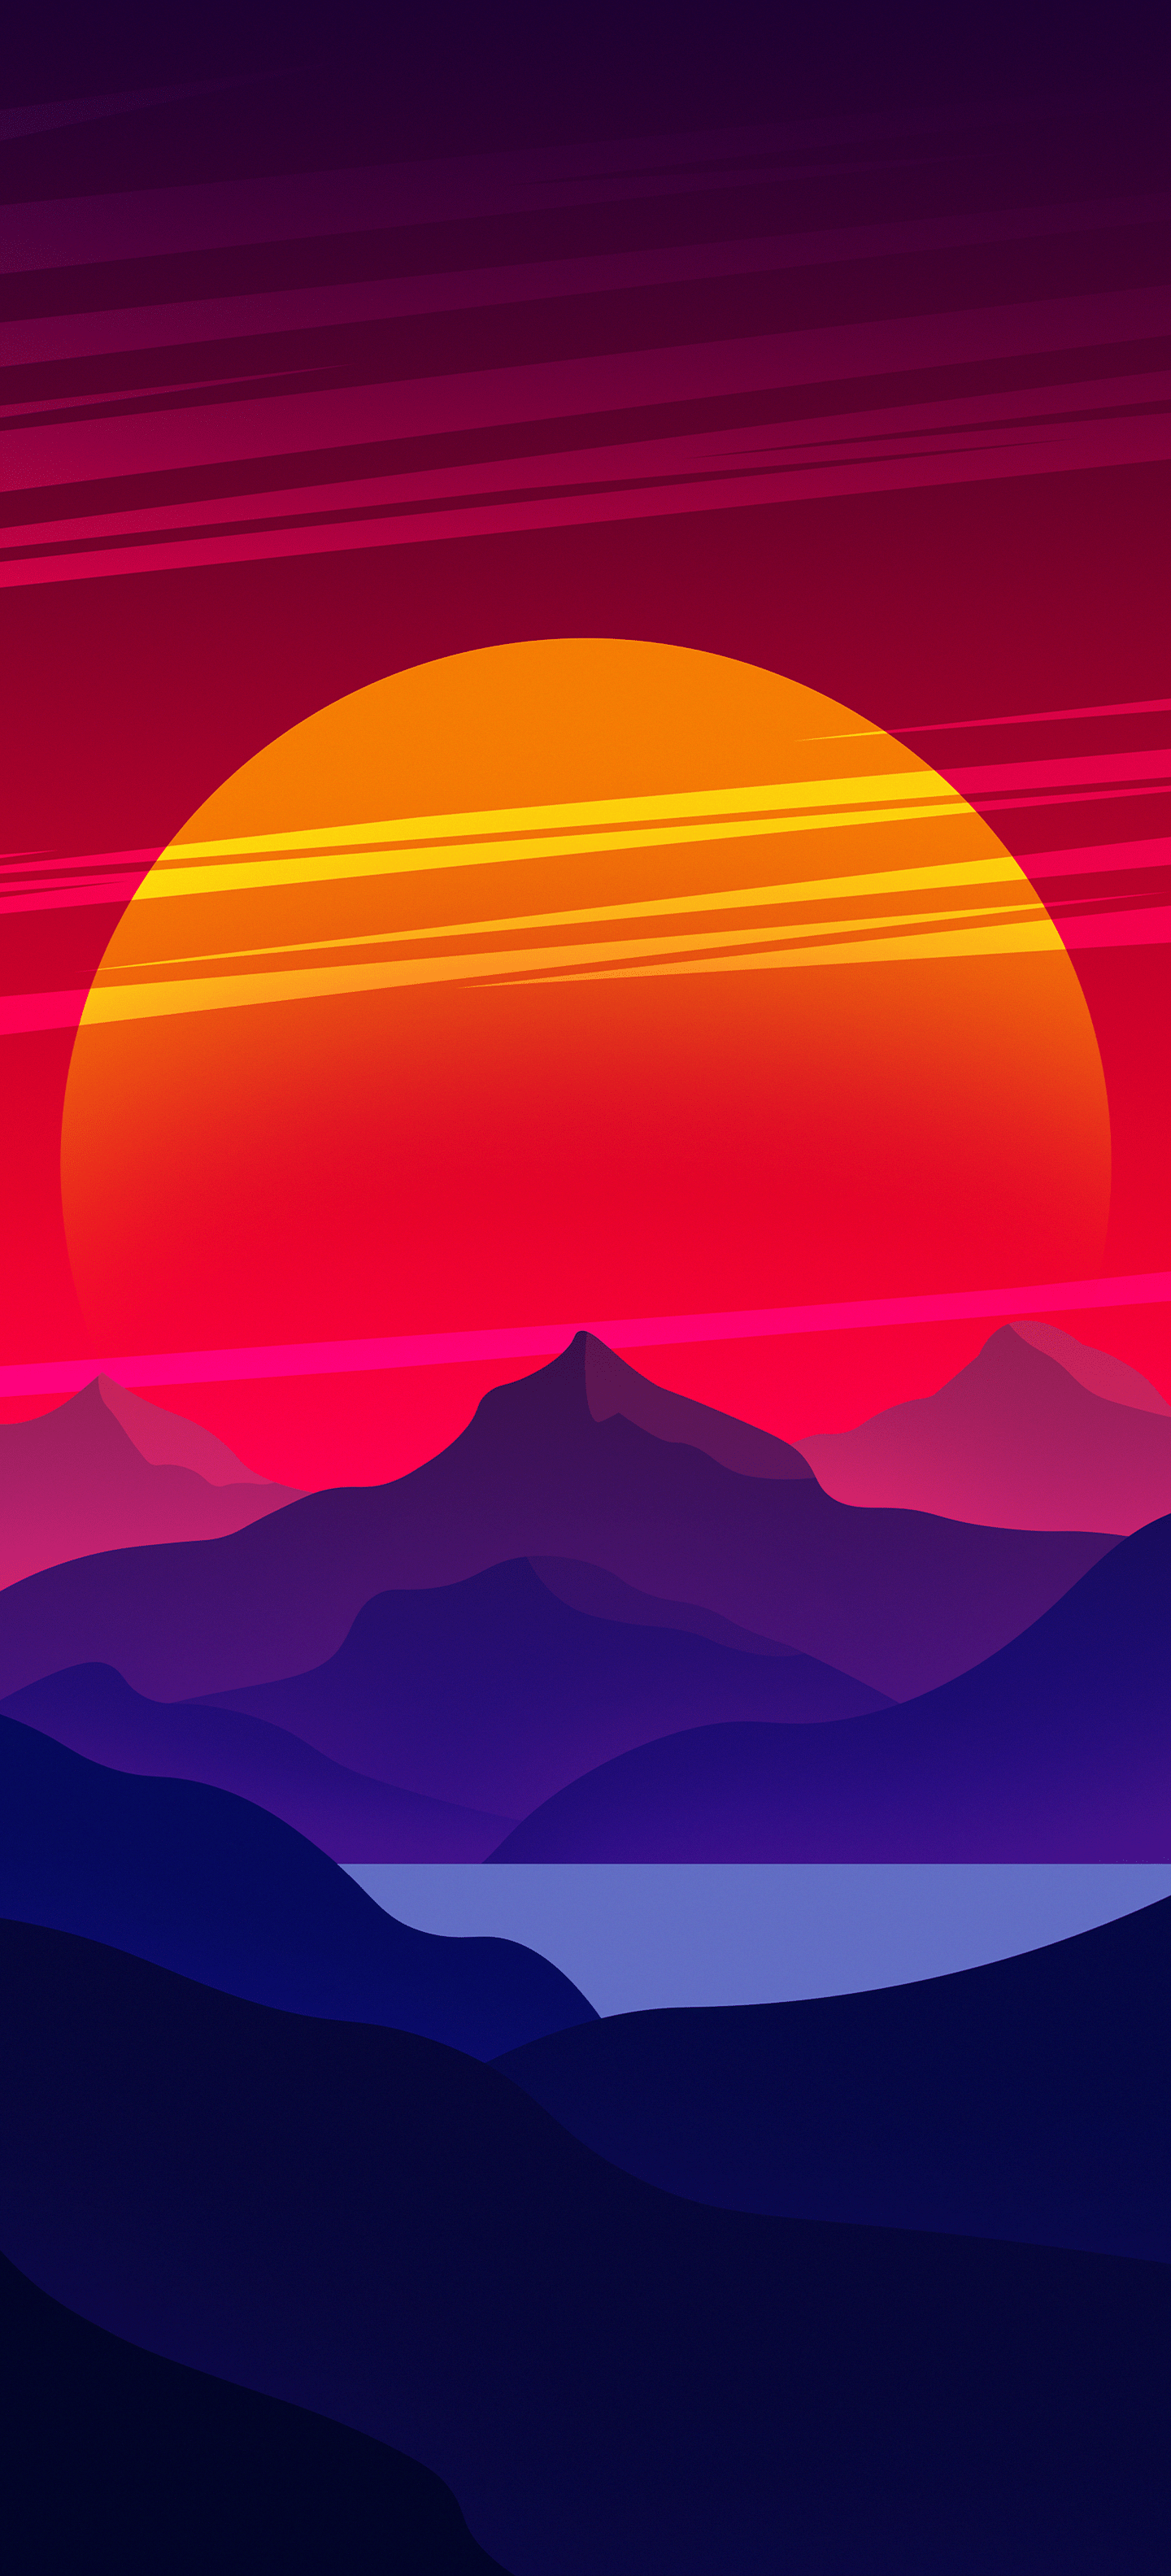 A sunset over purple mountains - 80s